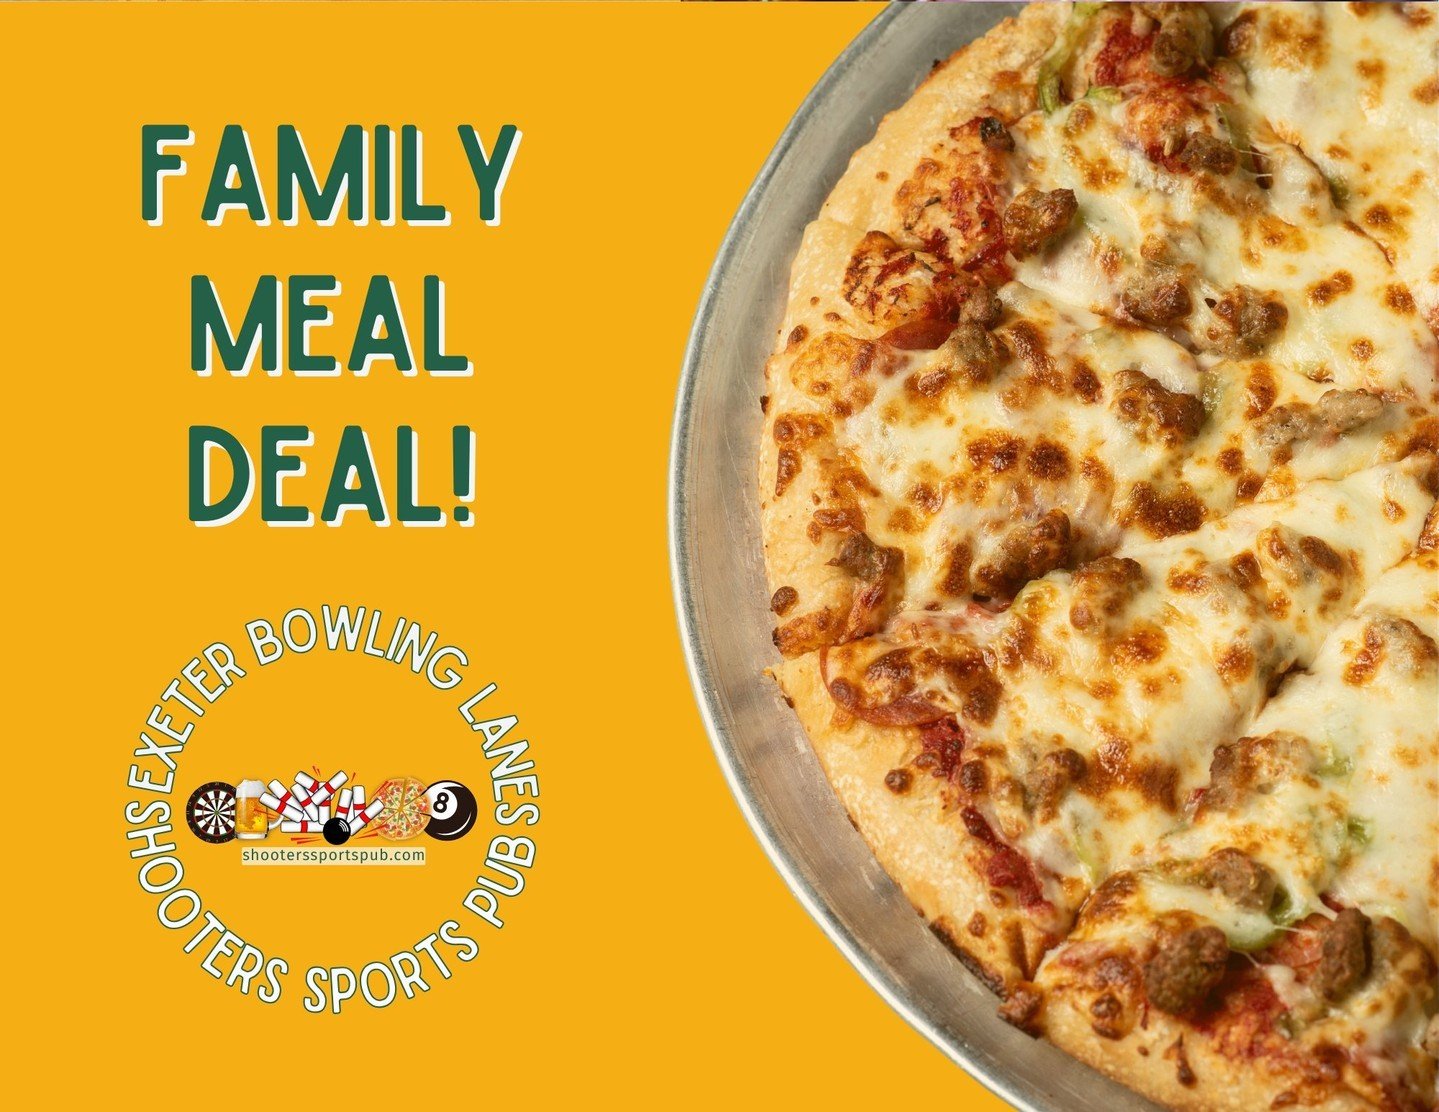 🍕🎳 Family Nights Just Got Better! Dive into our delicious Family Meal Deals that are a perfect strike for everyone! 🌟⁠
⁠
For up to 5 bowlers:⁠
Single Bowl &amp; Pizza Deal: $39⁠
1 Lane, 75 mins bowling, 1 Large Pizza, 1 Pitcher of Soda + Shoe Rent